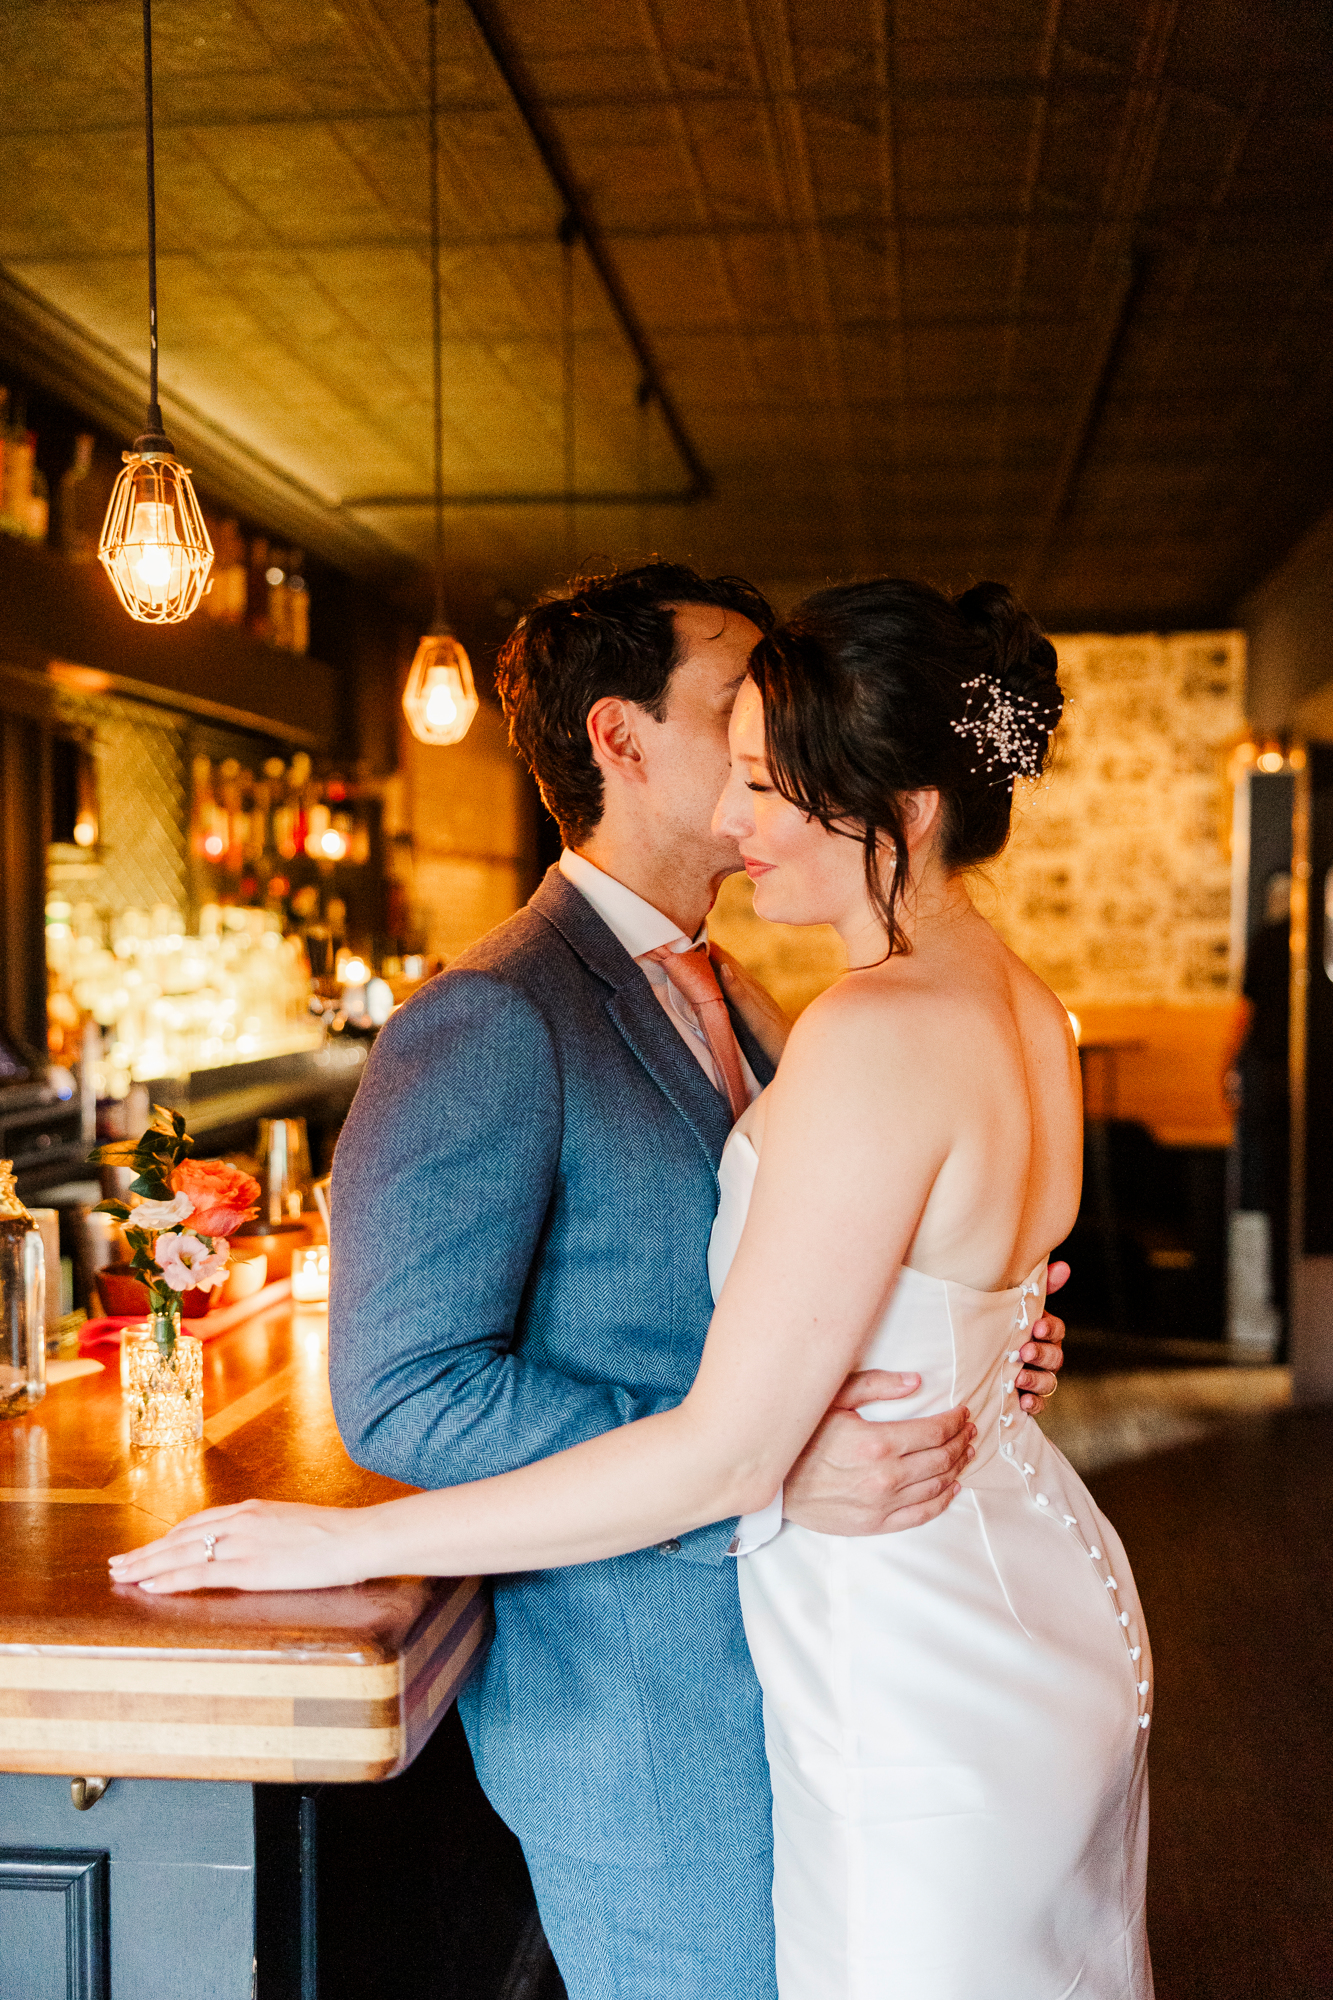 Authentic wedding at Gran Electrica